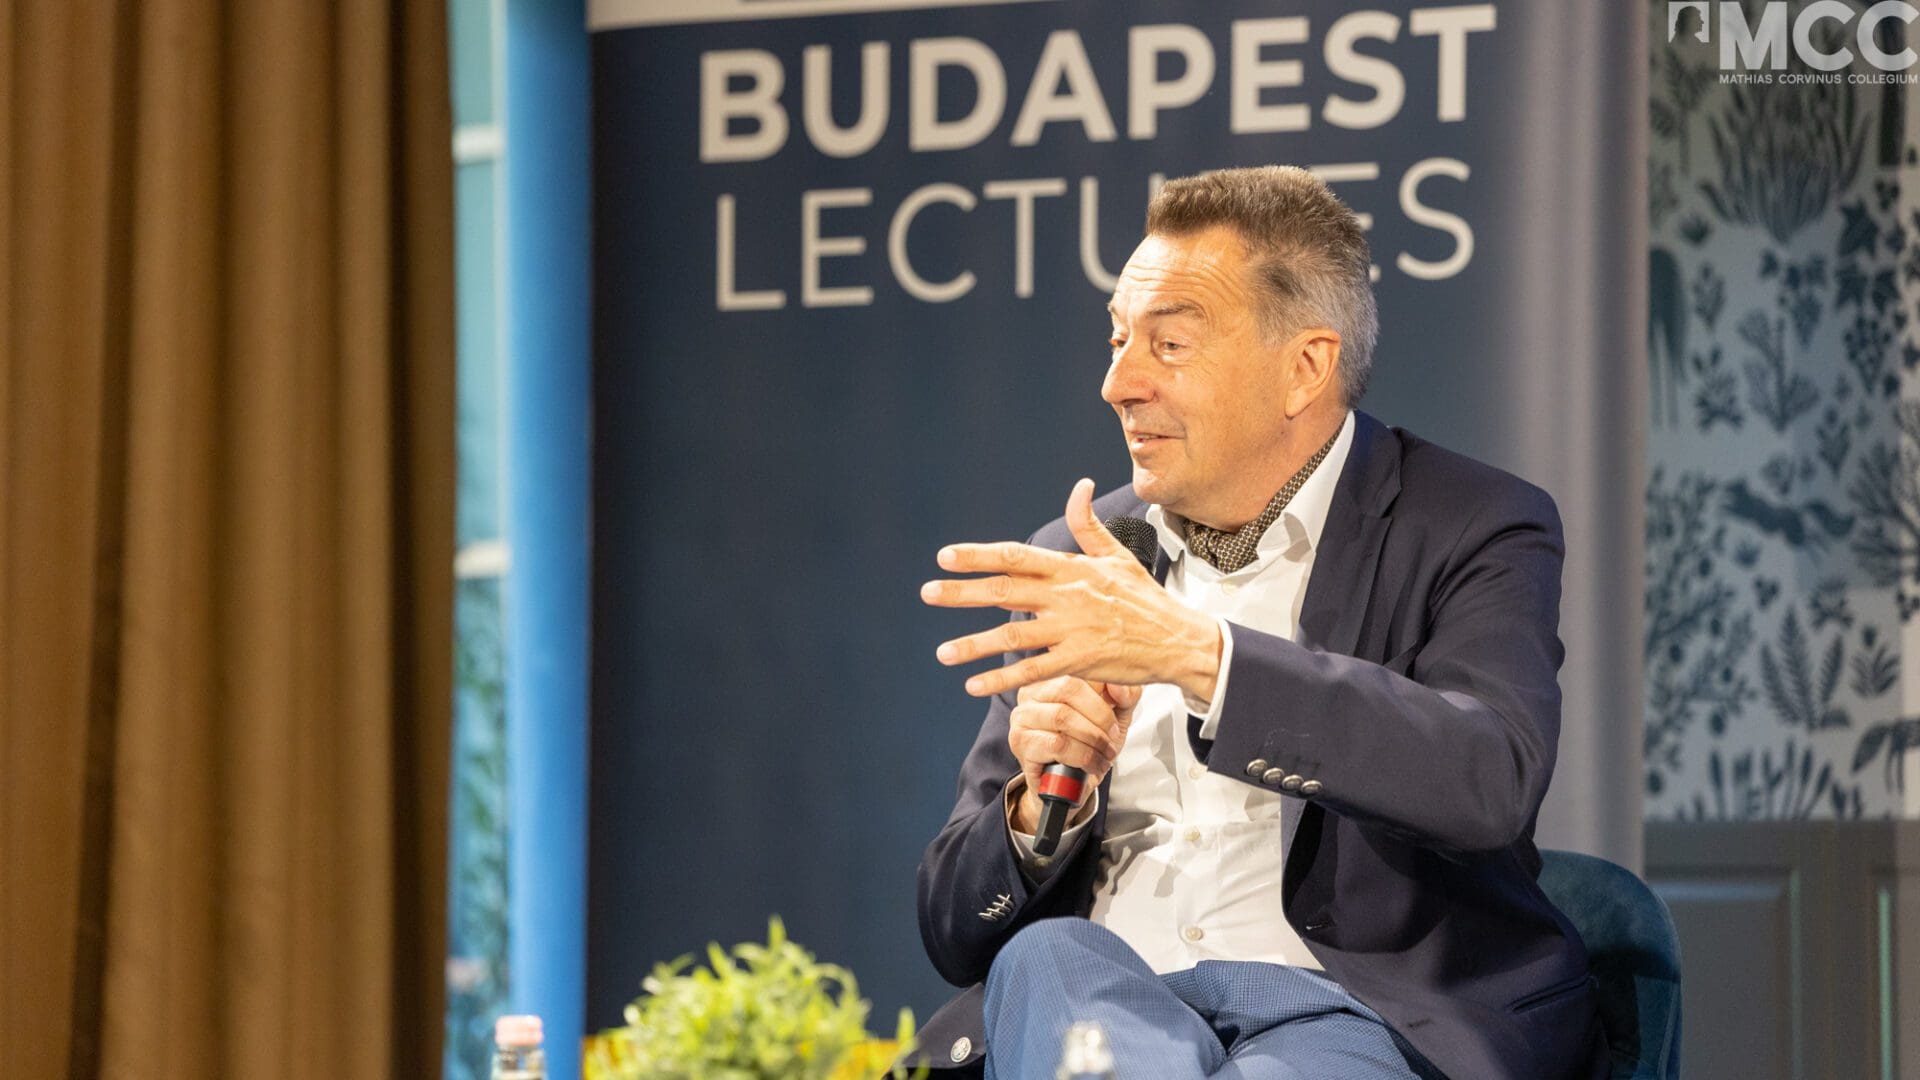 Peter Maurer speaking at the Budapest Lectures event of MCC on 29 April 2023.